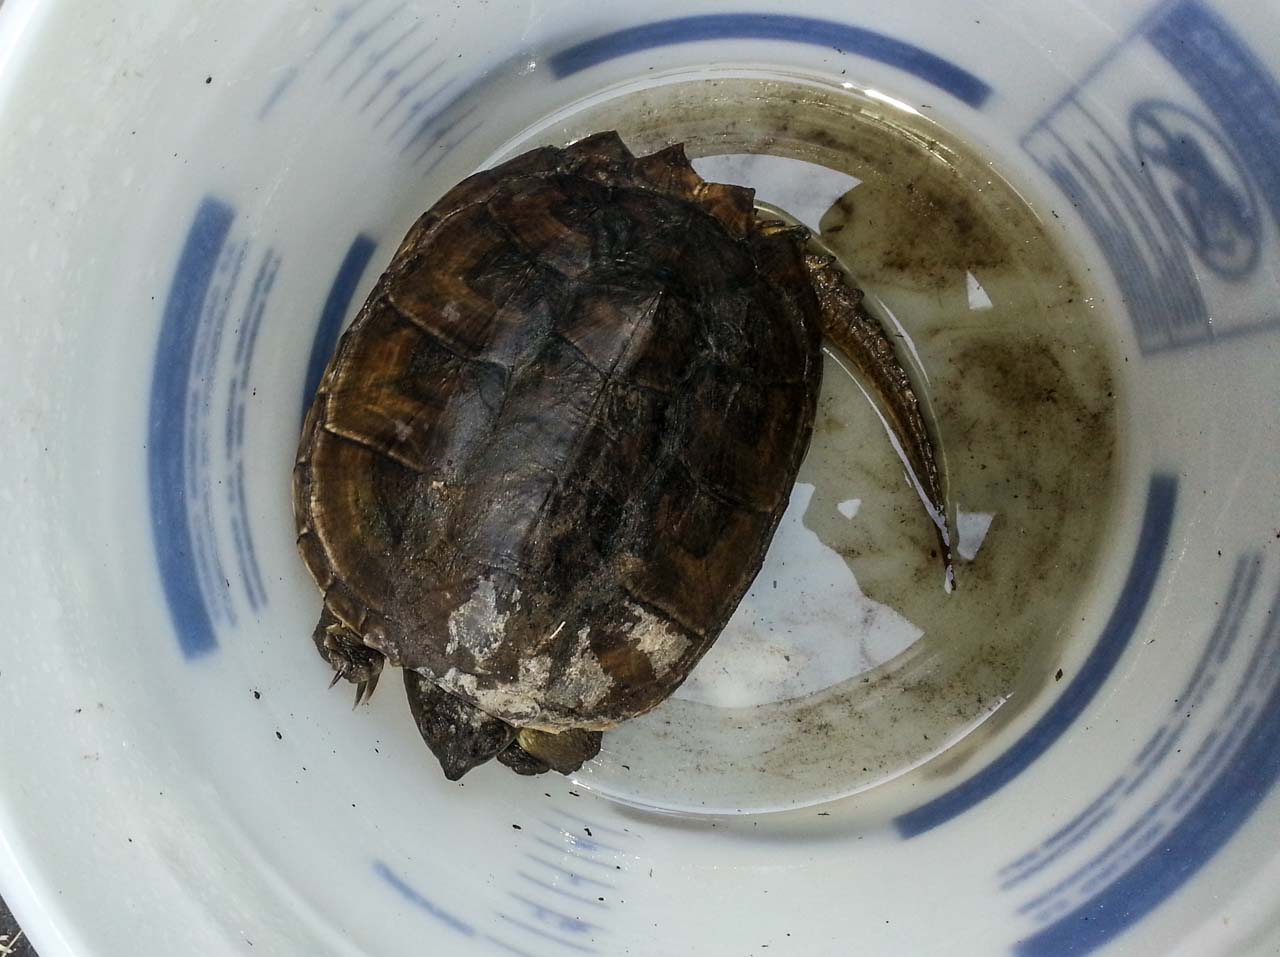 Snapping turtle in a bucket after being trapped in safe turtle trap. It is on its way to relocation into a larger pond